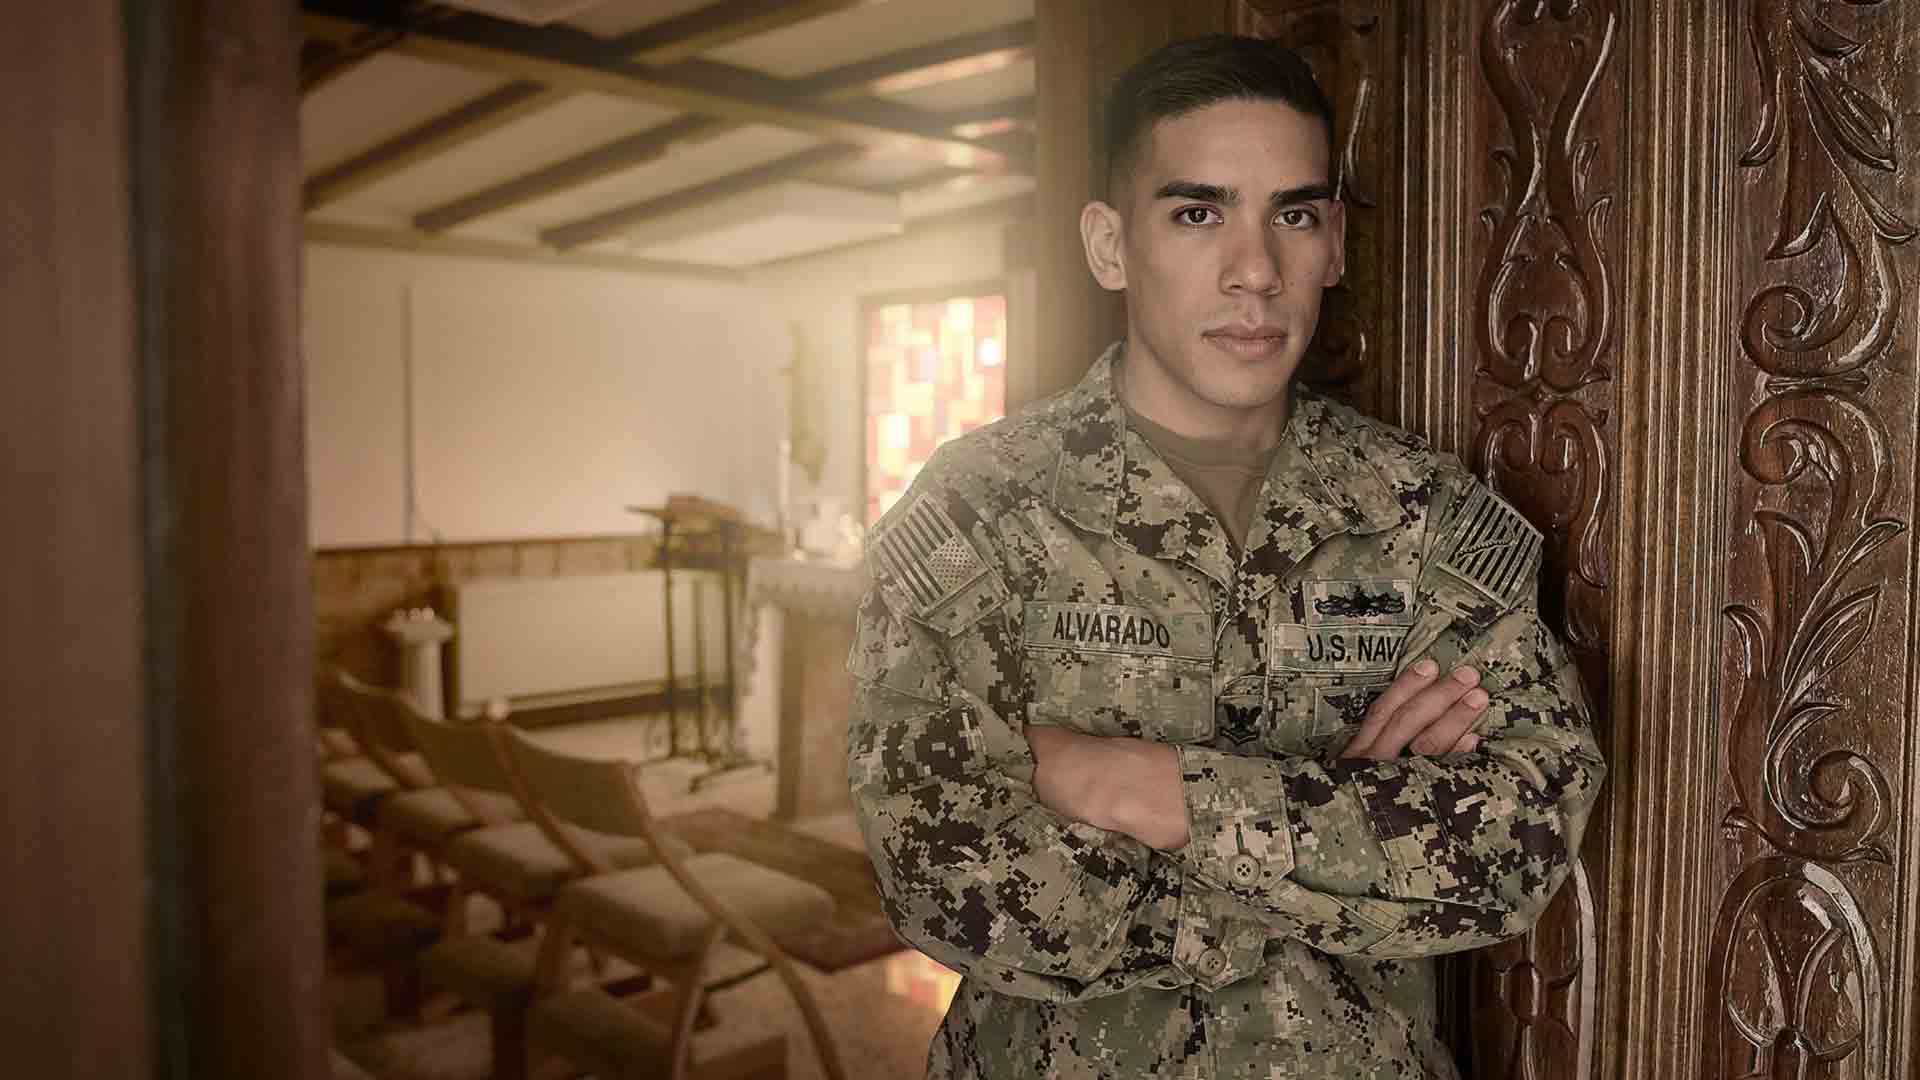 Navy Boatswain’s Mate Justin Alvarado poses for a photo in his family home wearing Navy fatigues